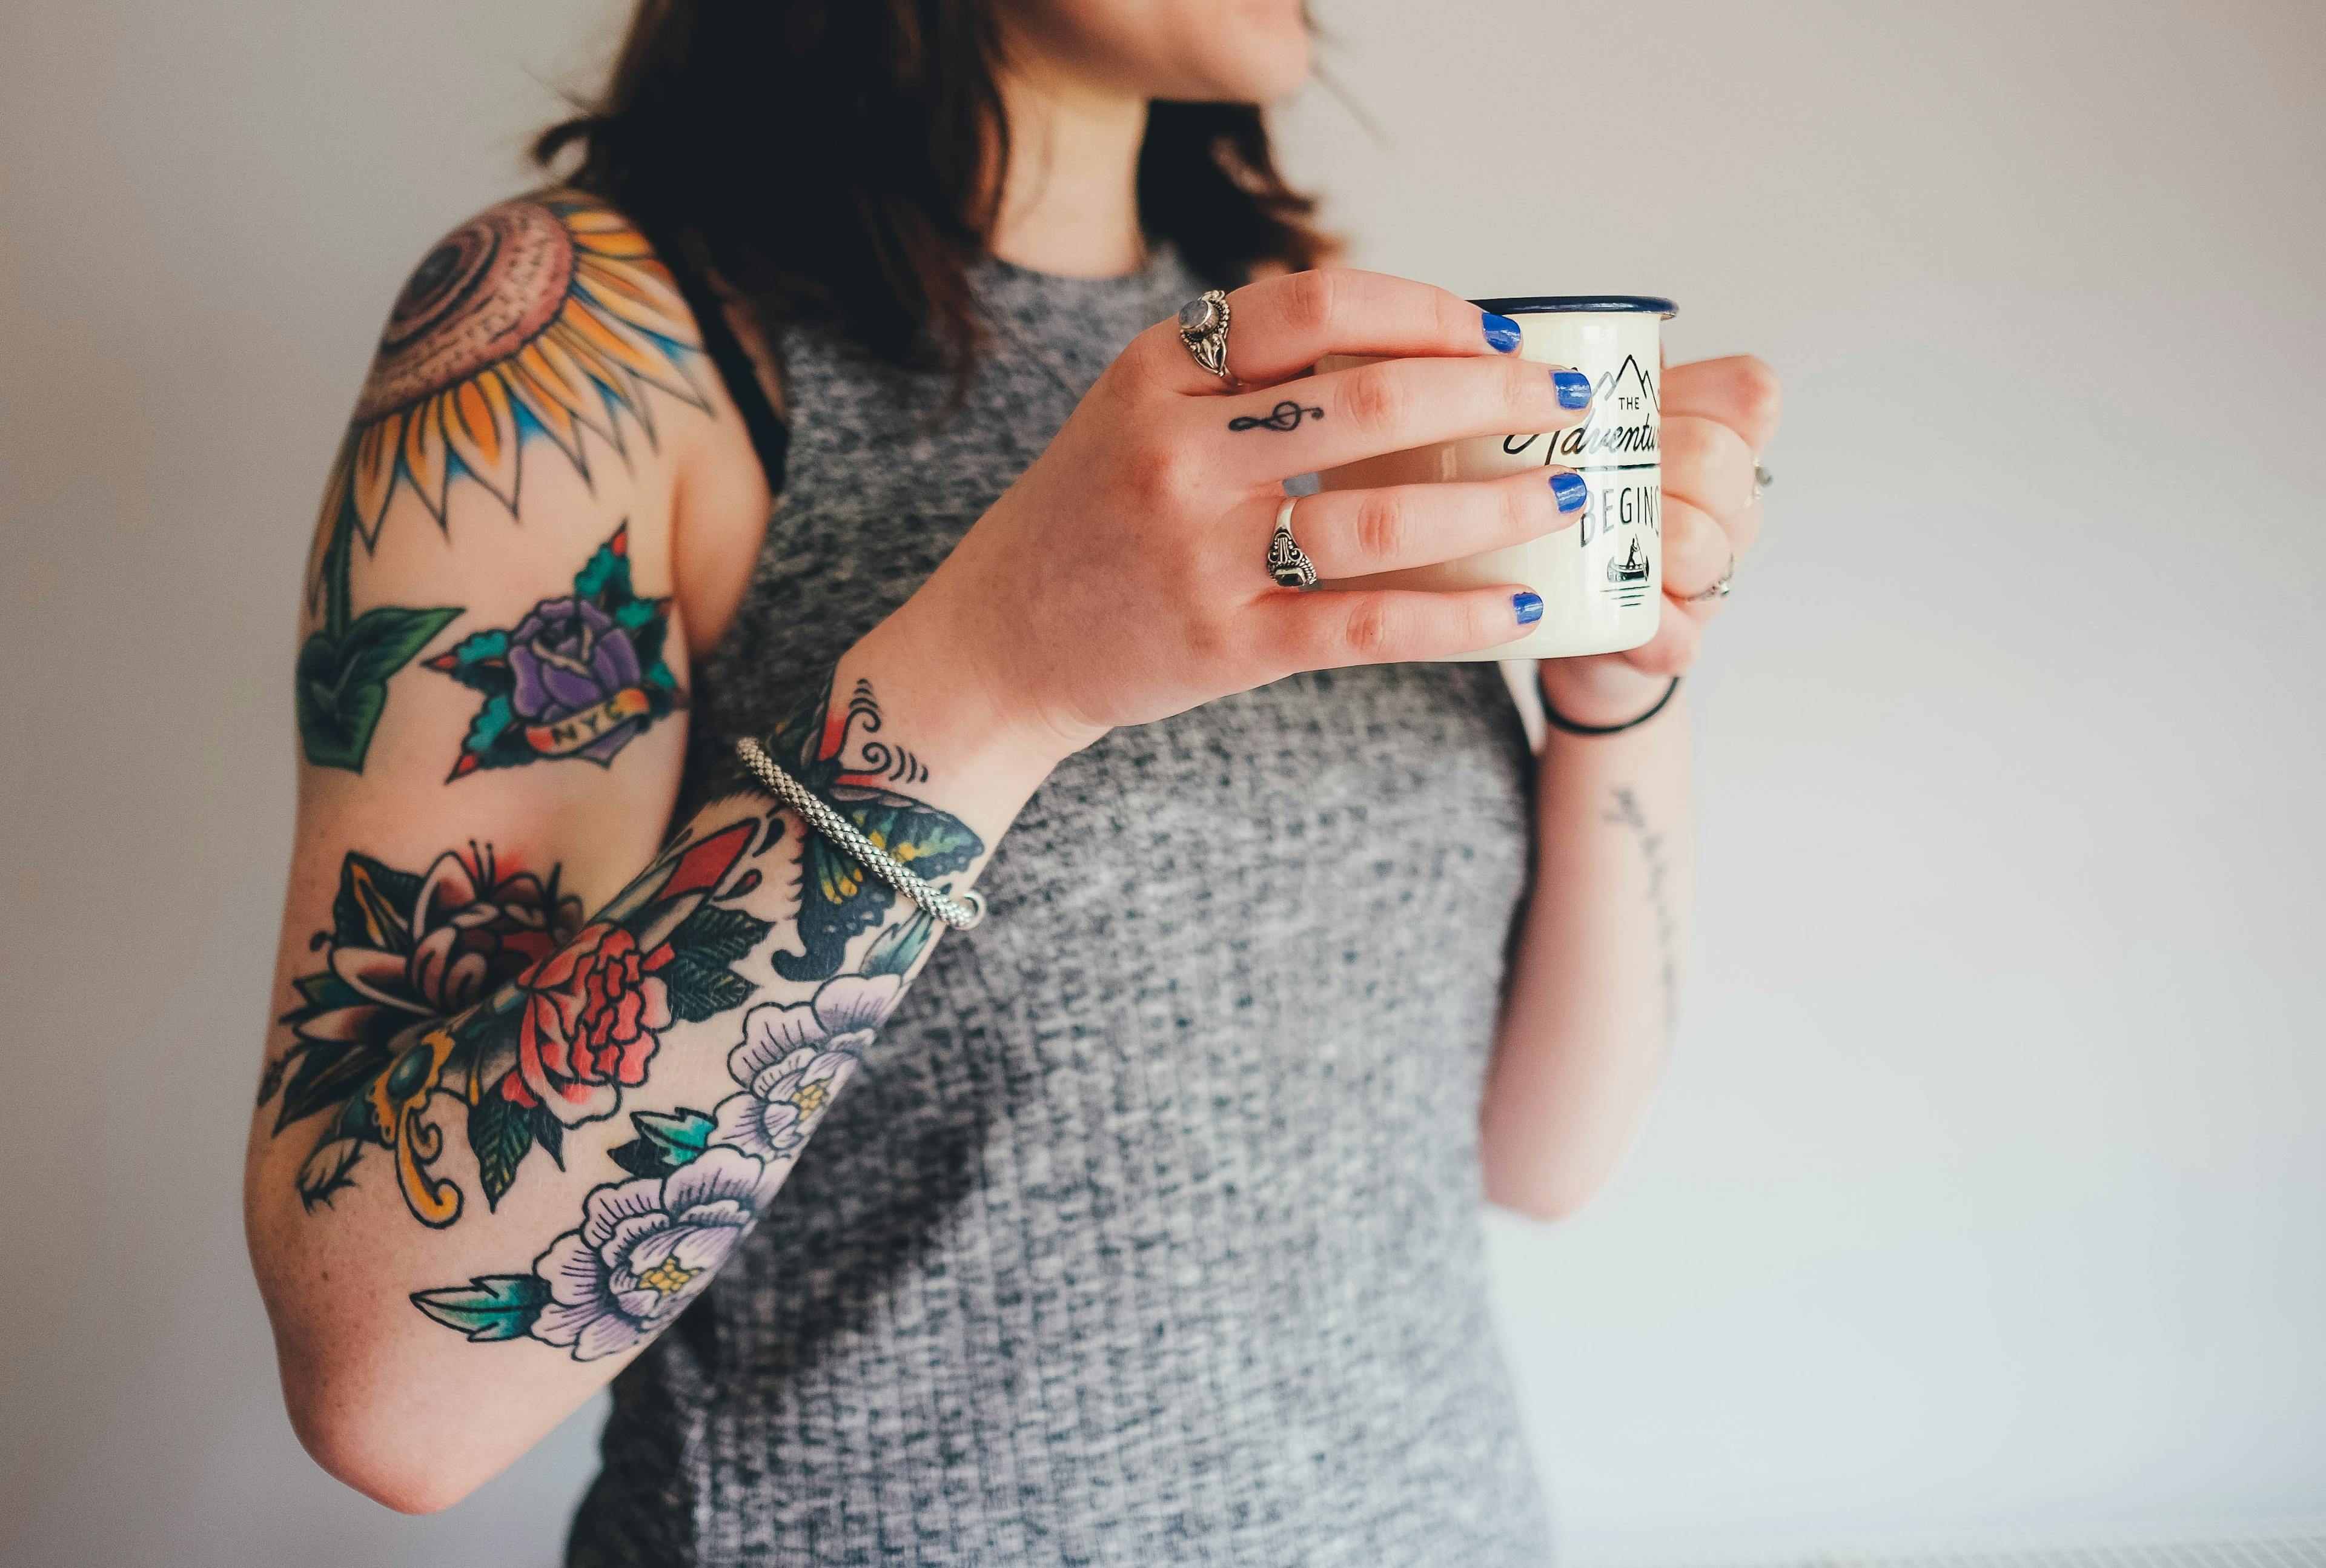 A person with a heavily tattooed arm, holding up a cup of coffee.